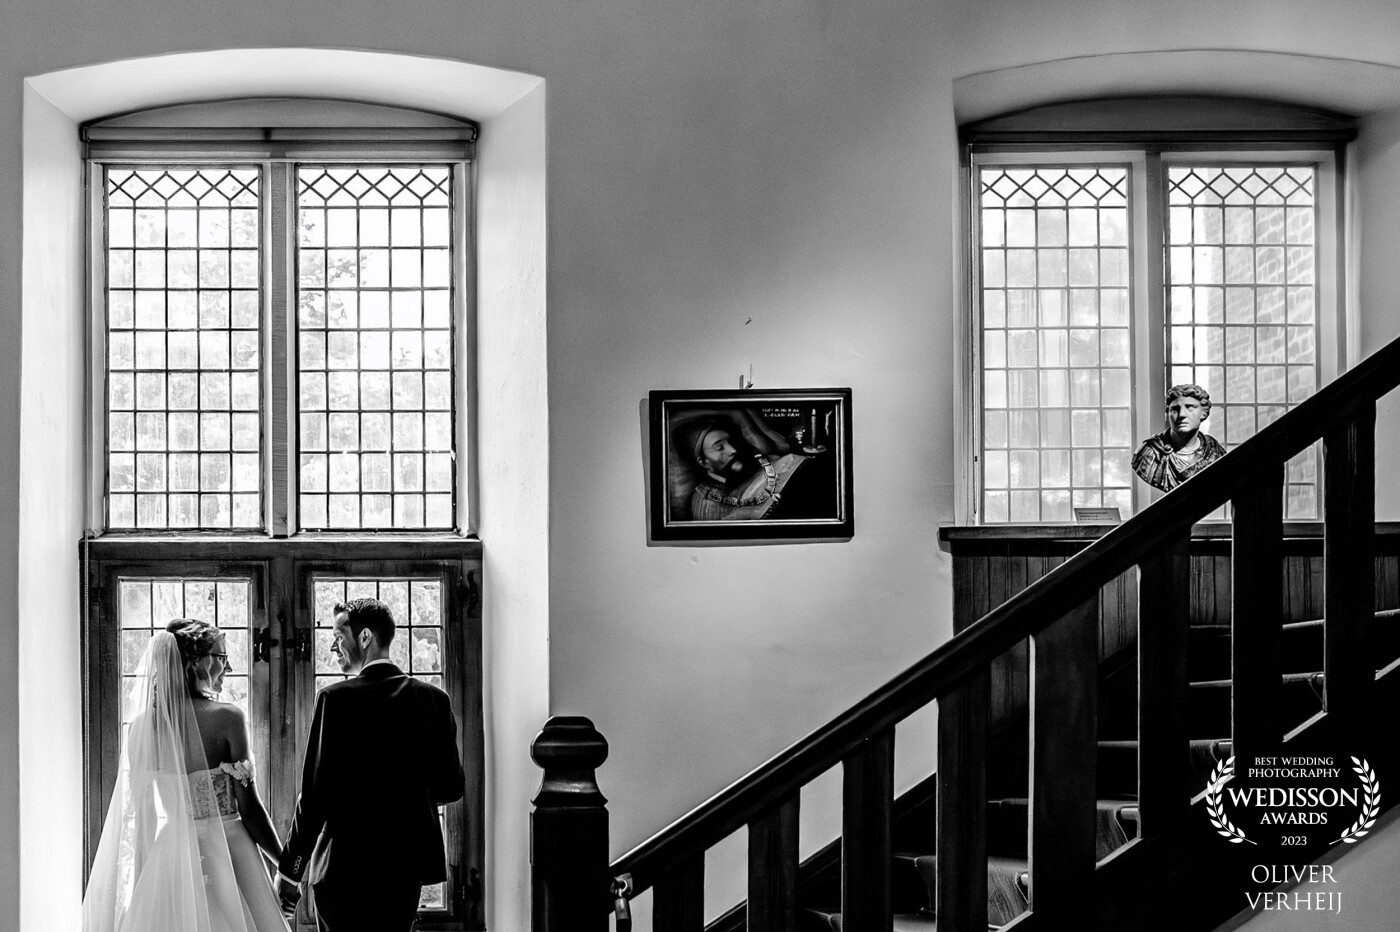 Monumental wedding venues like castle Huis Bergh make the for the best place to take wedding photos. Even while waiting for cake and toast.